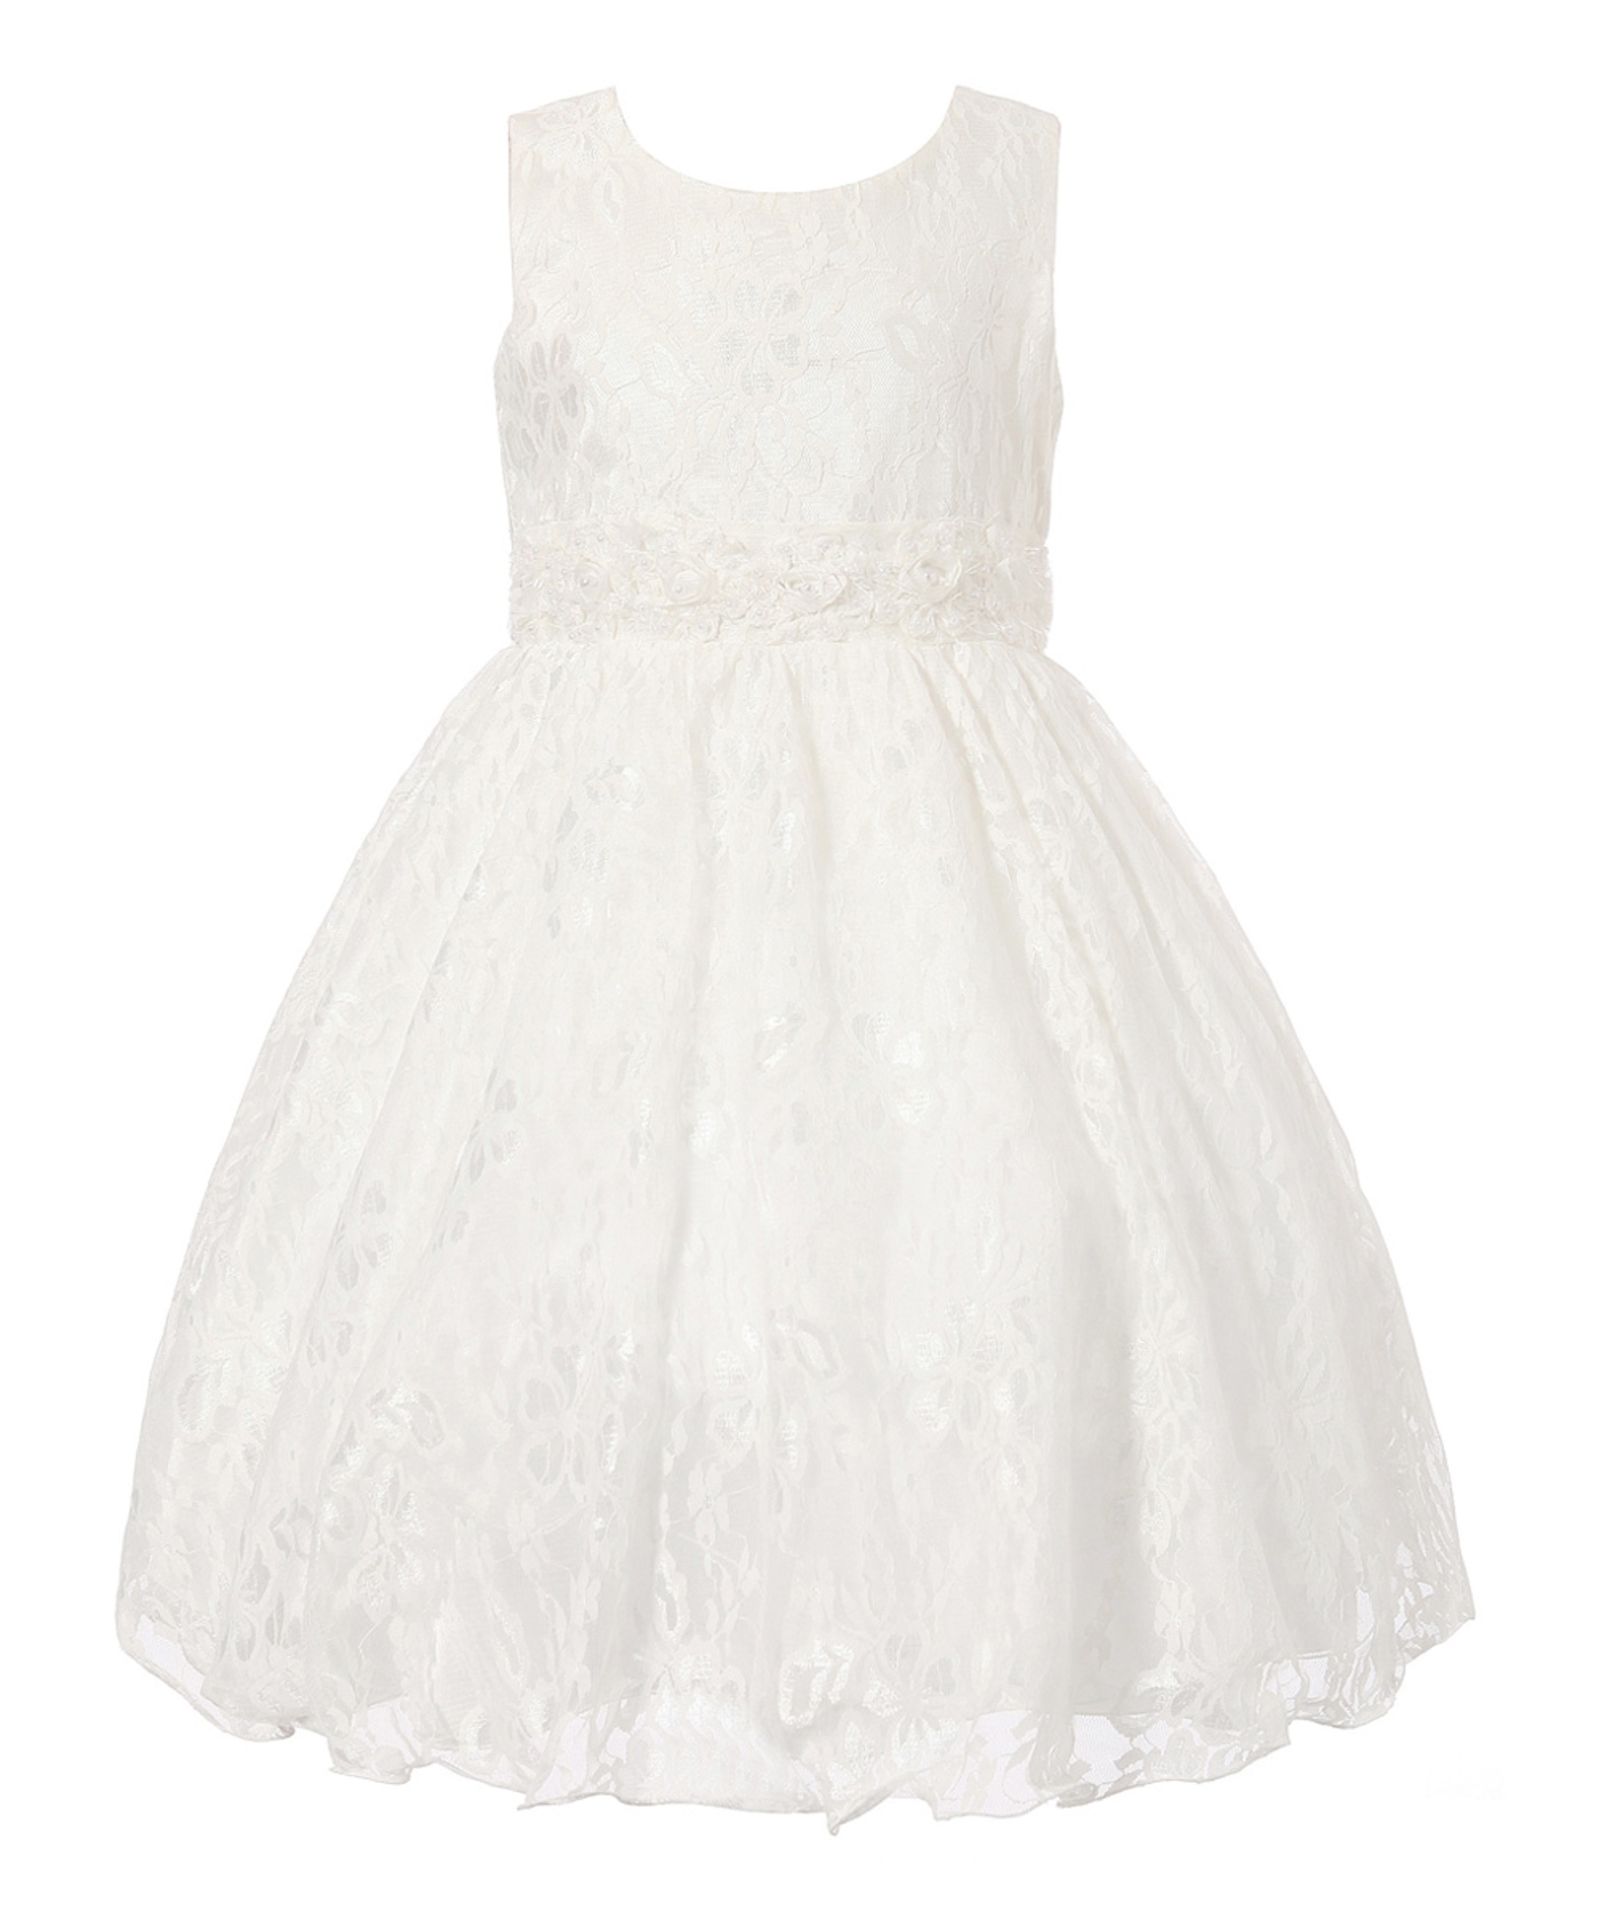 White Floral Lace Layered A-Line Dress - Toddler & Girls